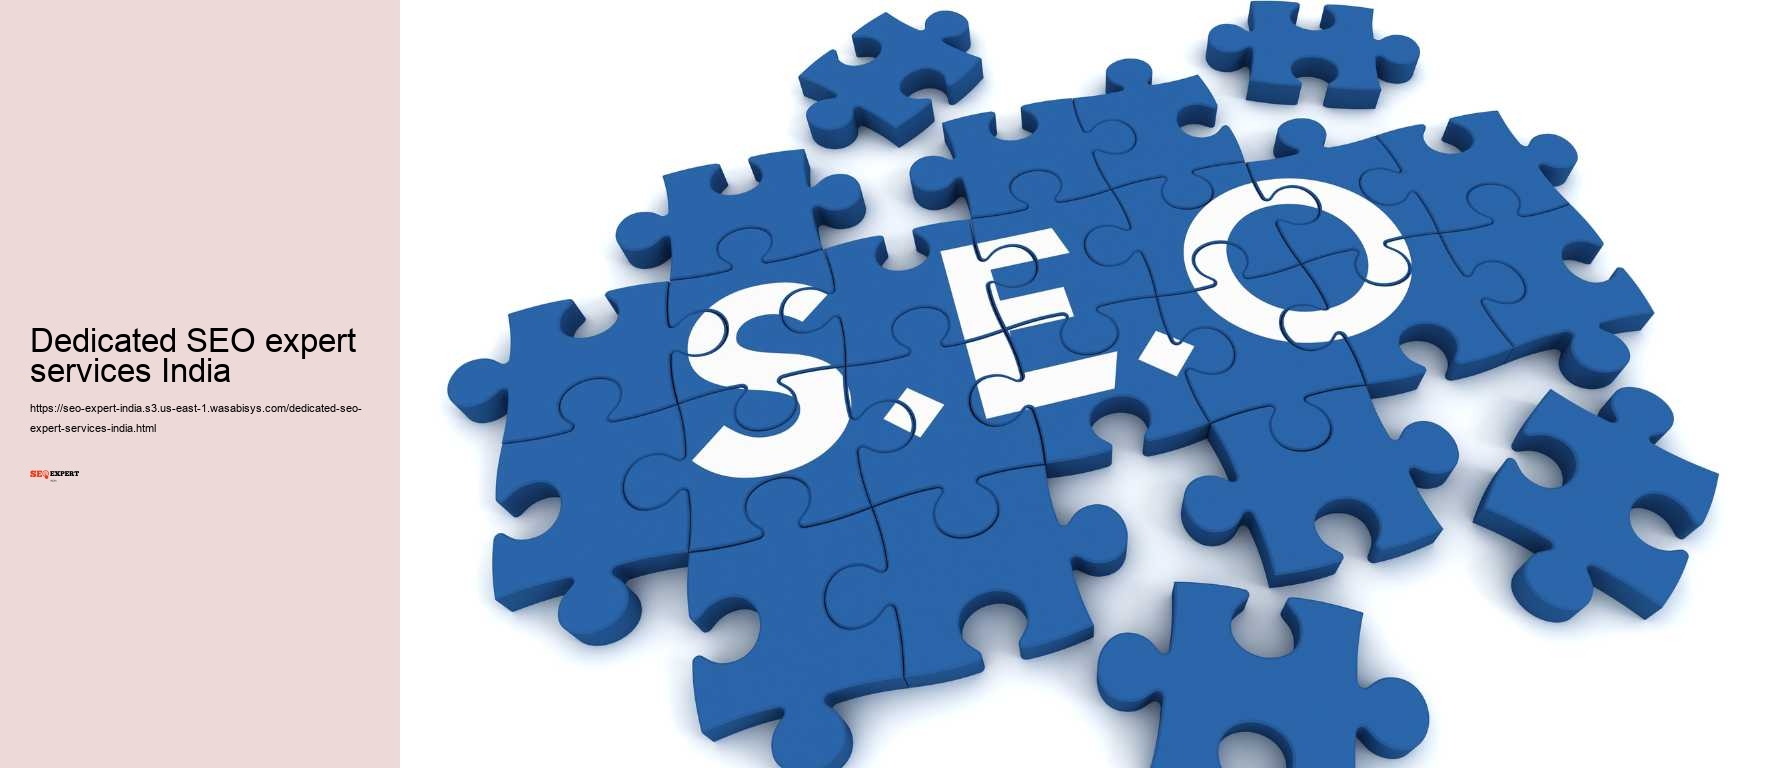 Dedicated SEO expert services India